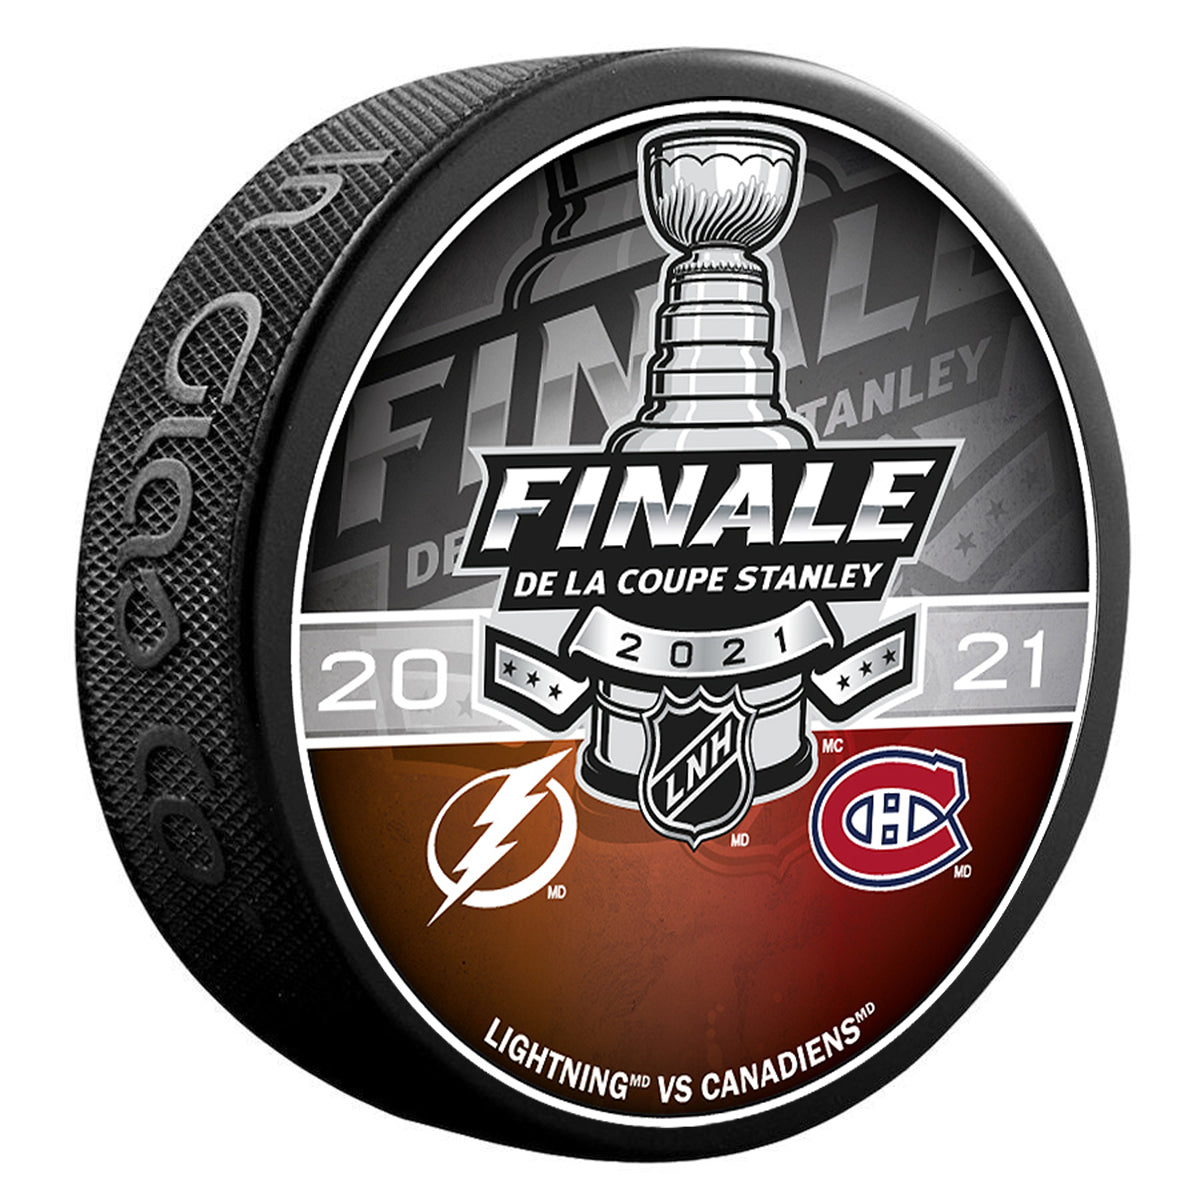 2021 NHL STANLEY CUP FINAL OFFICIAL PATCH FRENCH VERSION MONTREAL CANADIENS